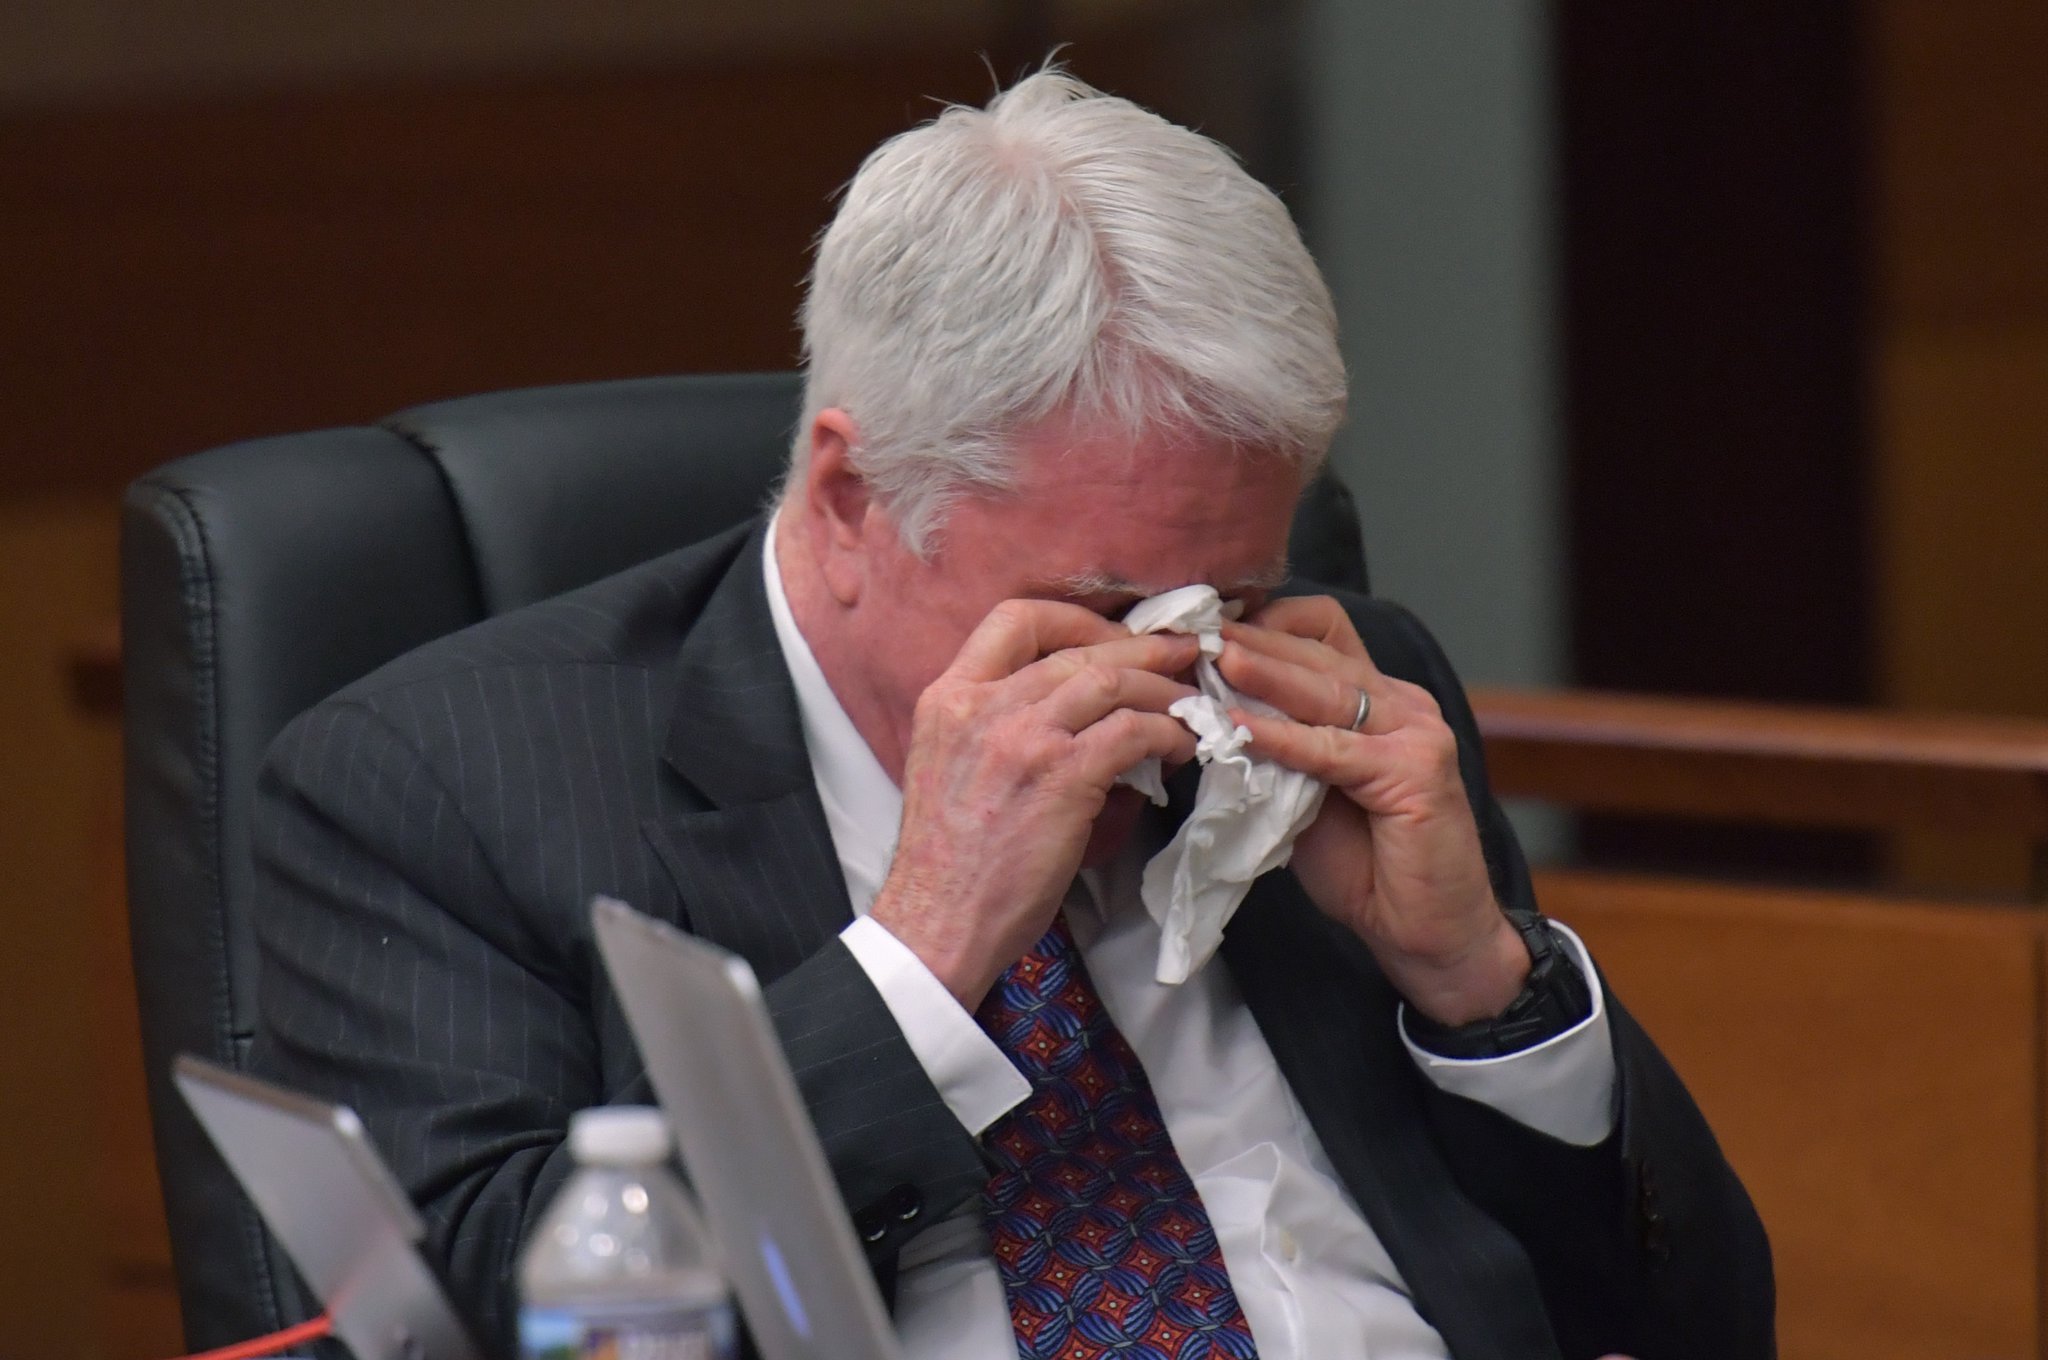 Tex McIver murder trial Focus shifts to the shooting itself